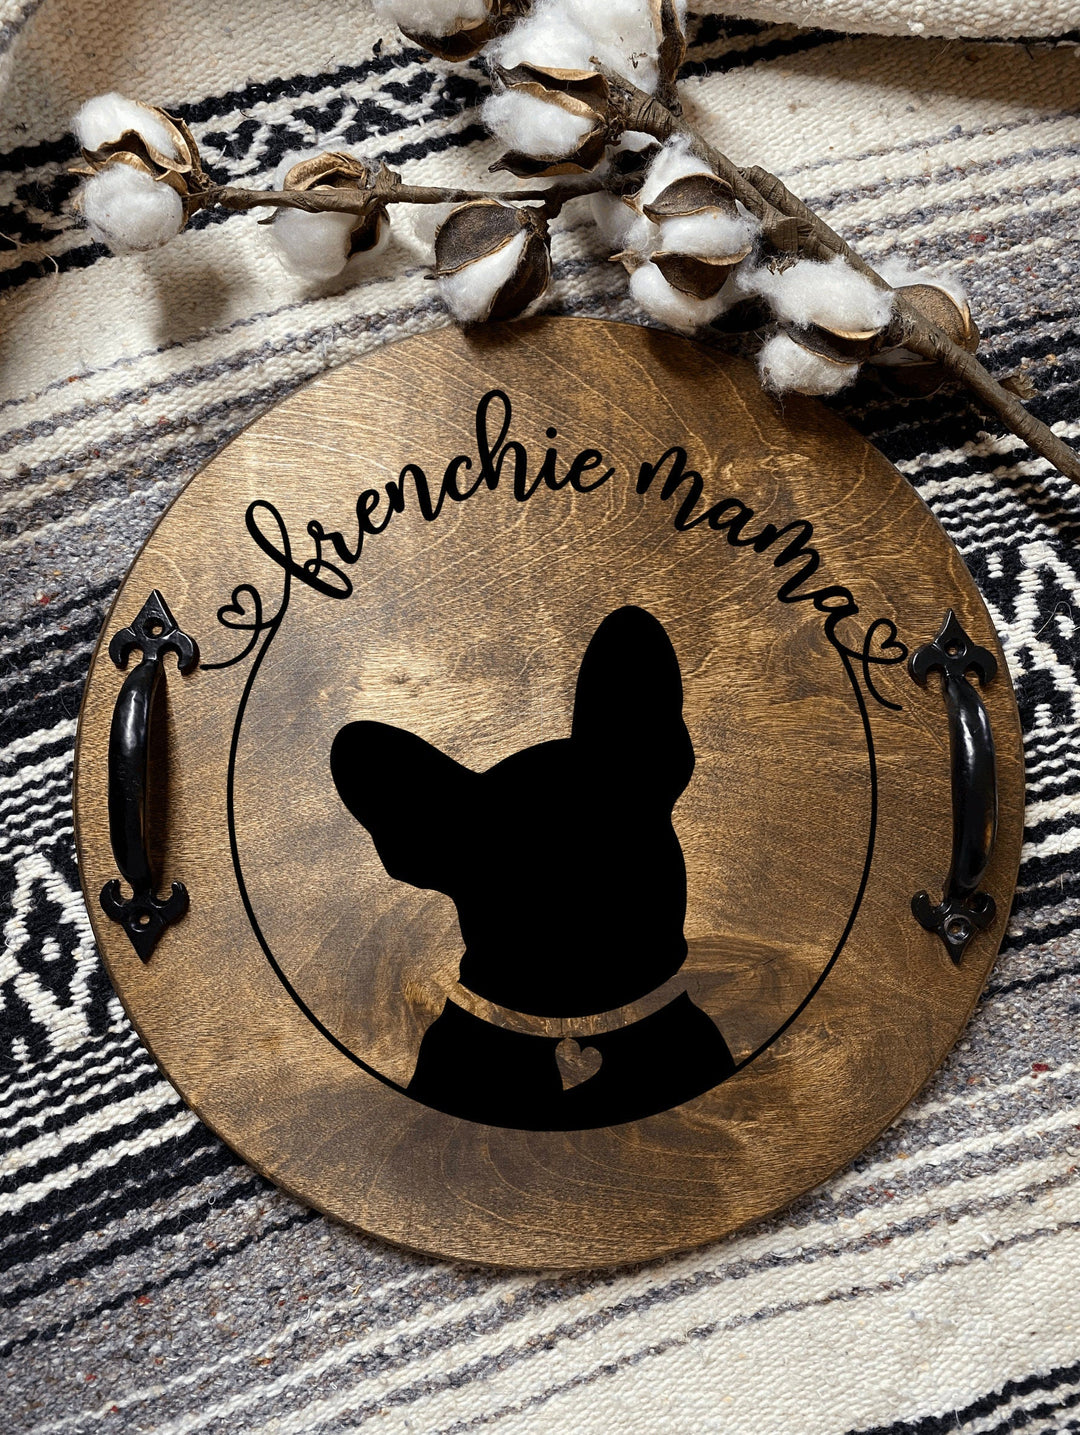 Frenchie Mama Decor, Coffee Bar Tray, Wood Serving Tray, Rustic Tray